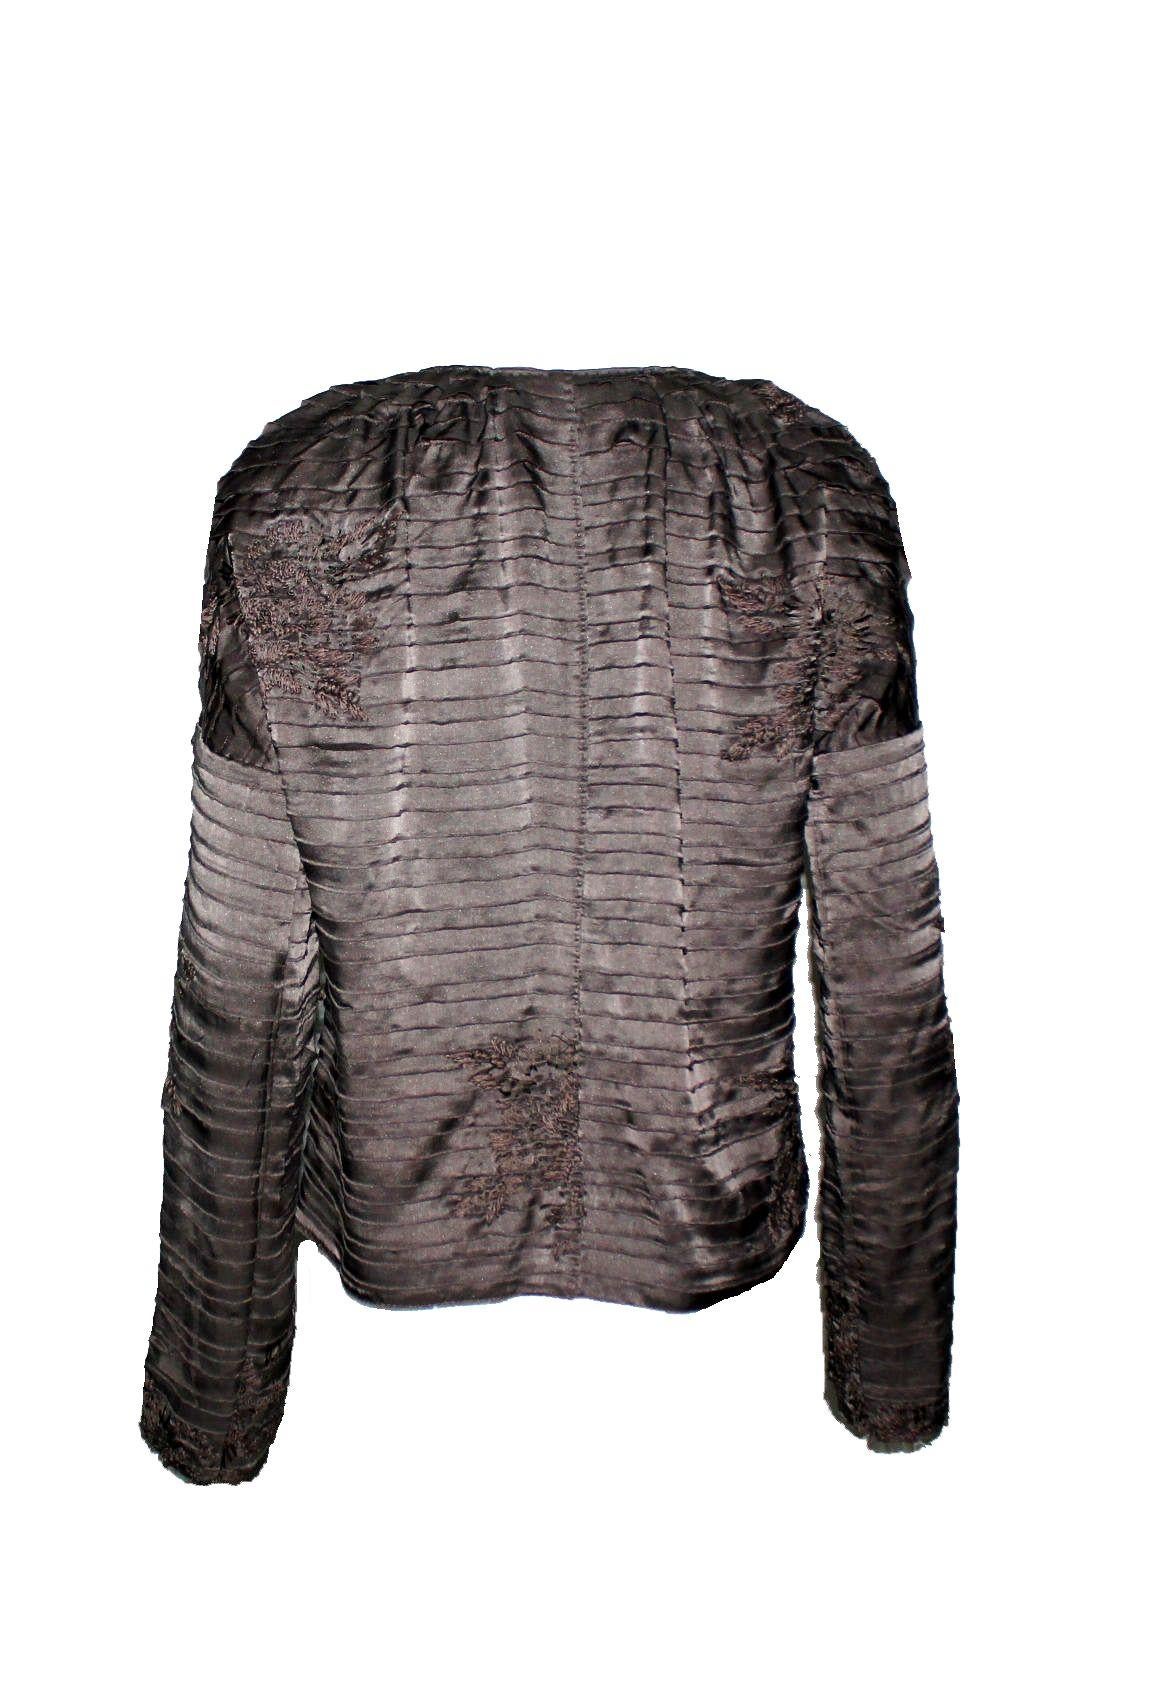 Stunning silk jacket by Tom Ford for Gucci
From his famous SS 2003 collection
Beautiful fringed, layered silk
Like demi-couture, all hand-stitched and embroidered
Stunning piece
Made in Italy
Dry Clean Only

This is for the jacket only.

Please find